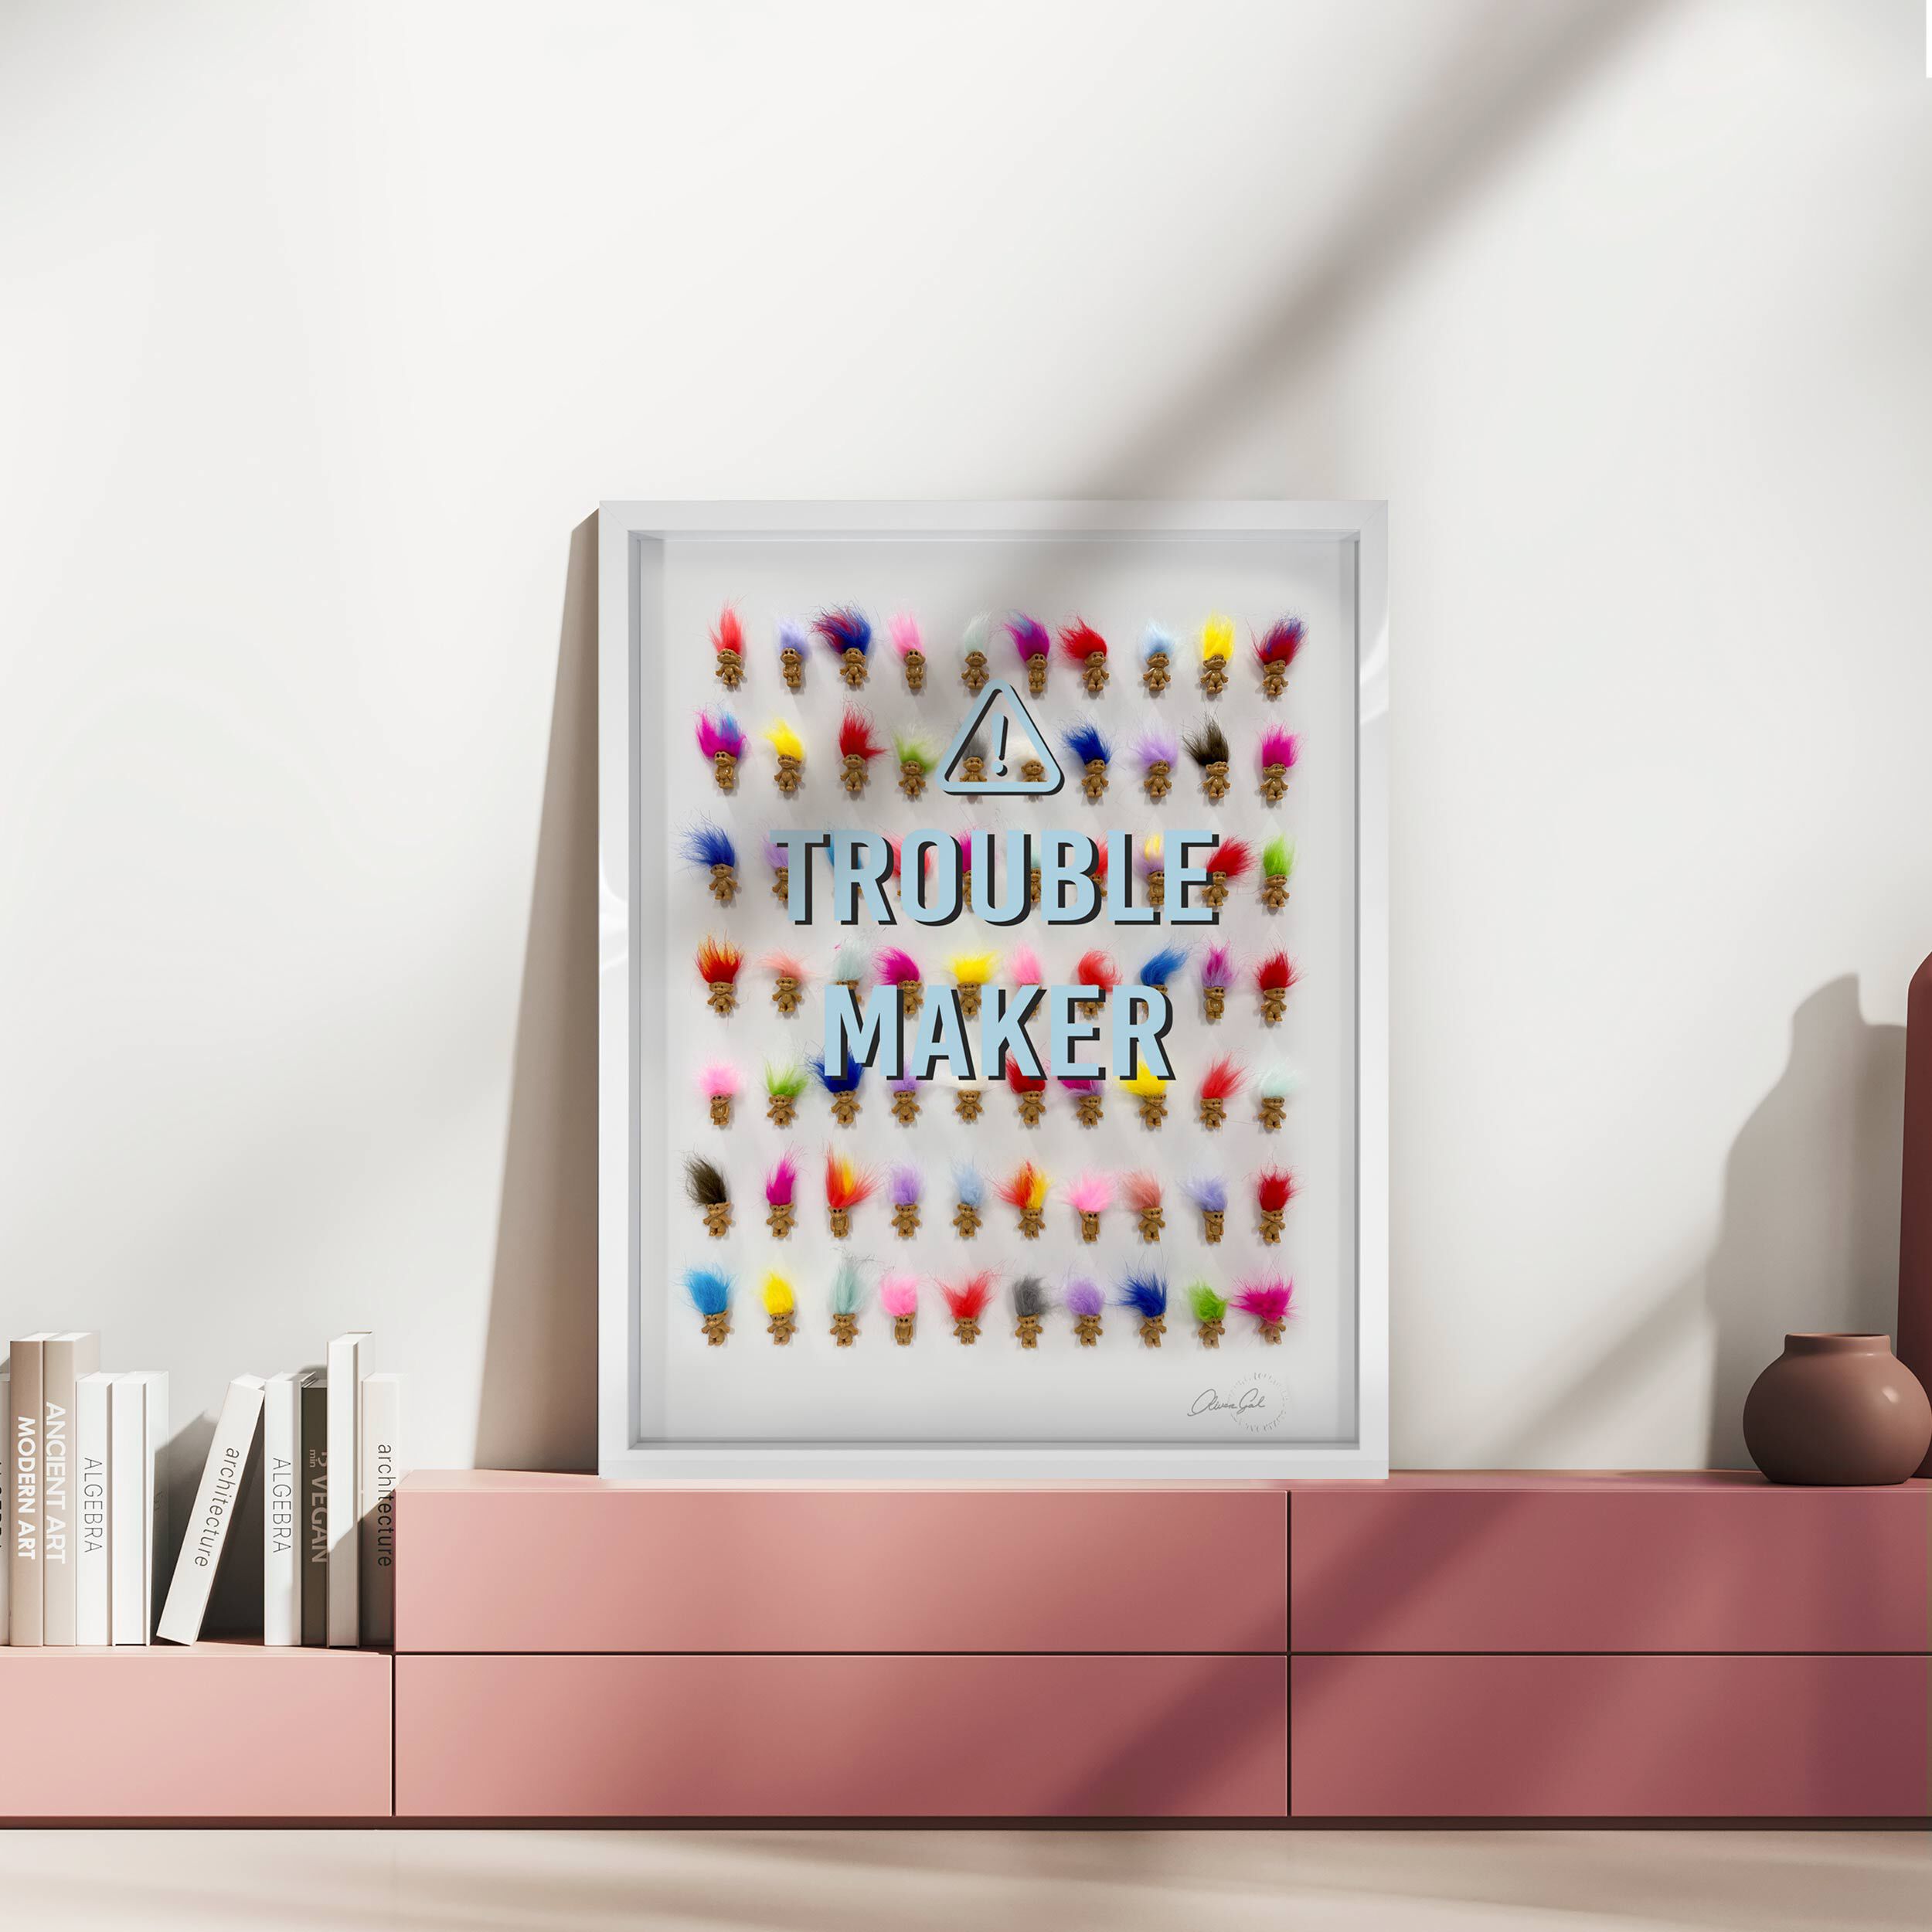 Limited-Edition 3D Wall Art | Oliver Gal